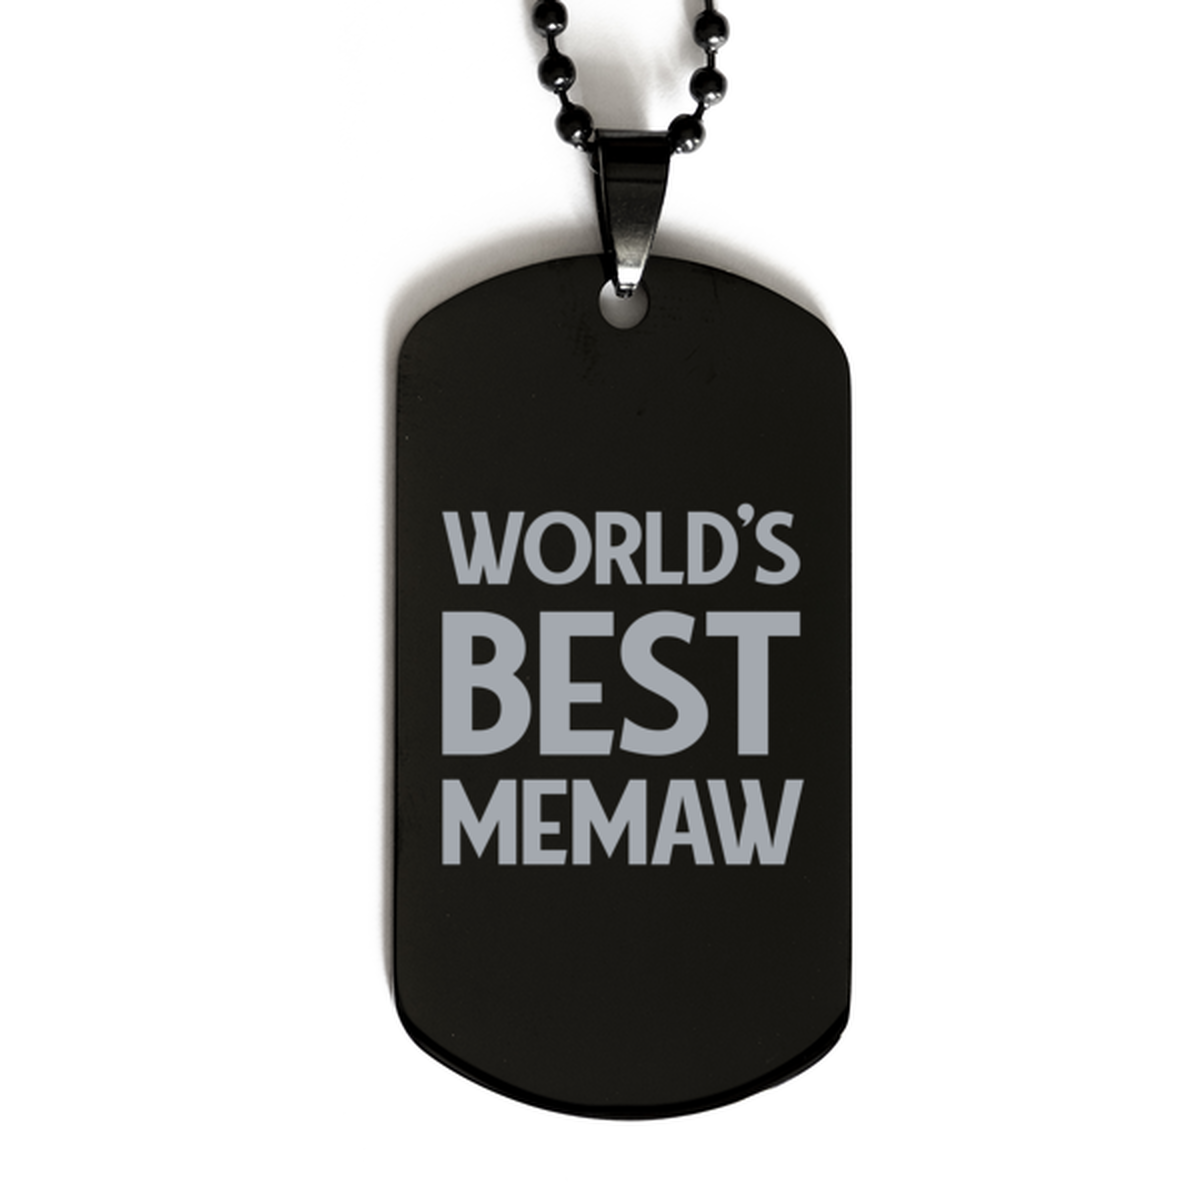 Worlds Best Memaw Gifts, Funny Black Engraved Dog Tag For Memaw, Birthday Presents For Women